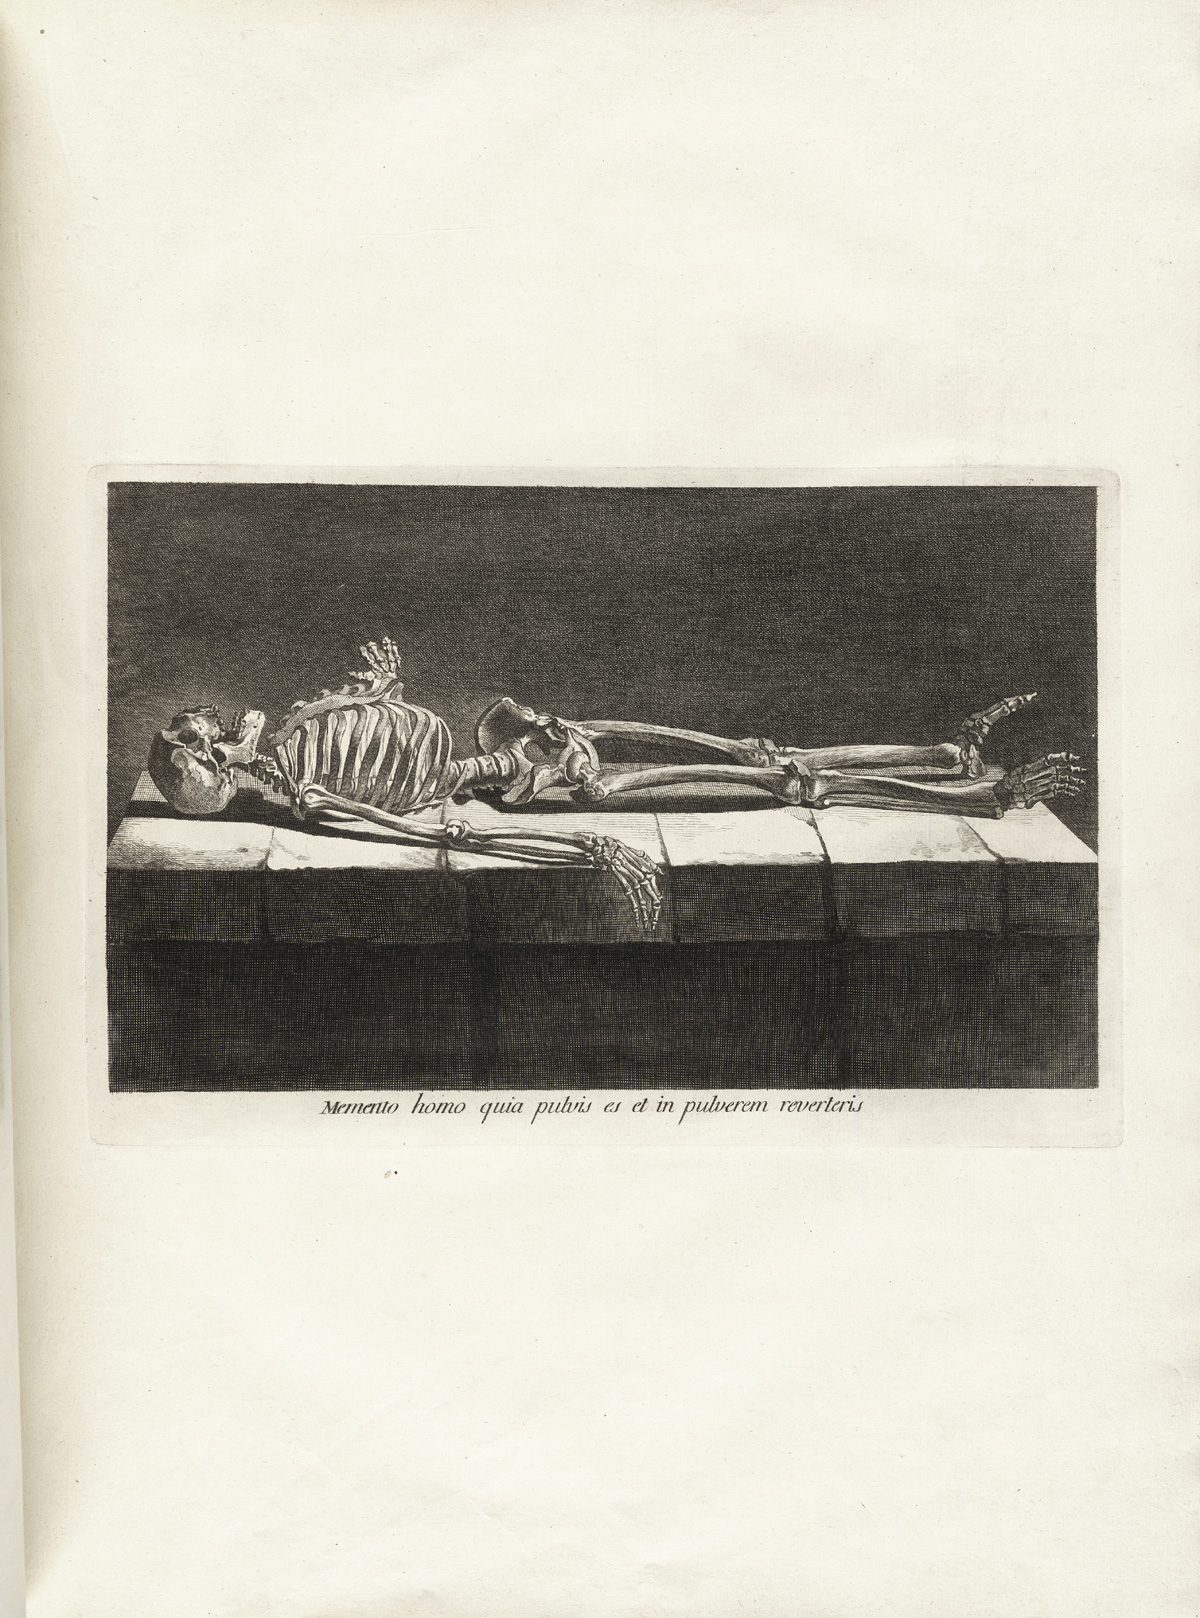 Engraving of a skeleton lying down on a slab of marble as if in a sepulcher, viewed from the side, from Jacques Gamelin’s Nouveau recueil d’osteologie et de myologie, NLM Call no.: WZ 260 G178m 1779.